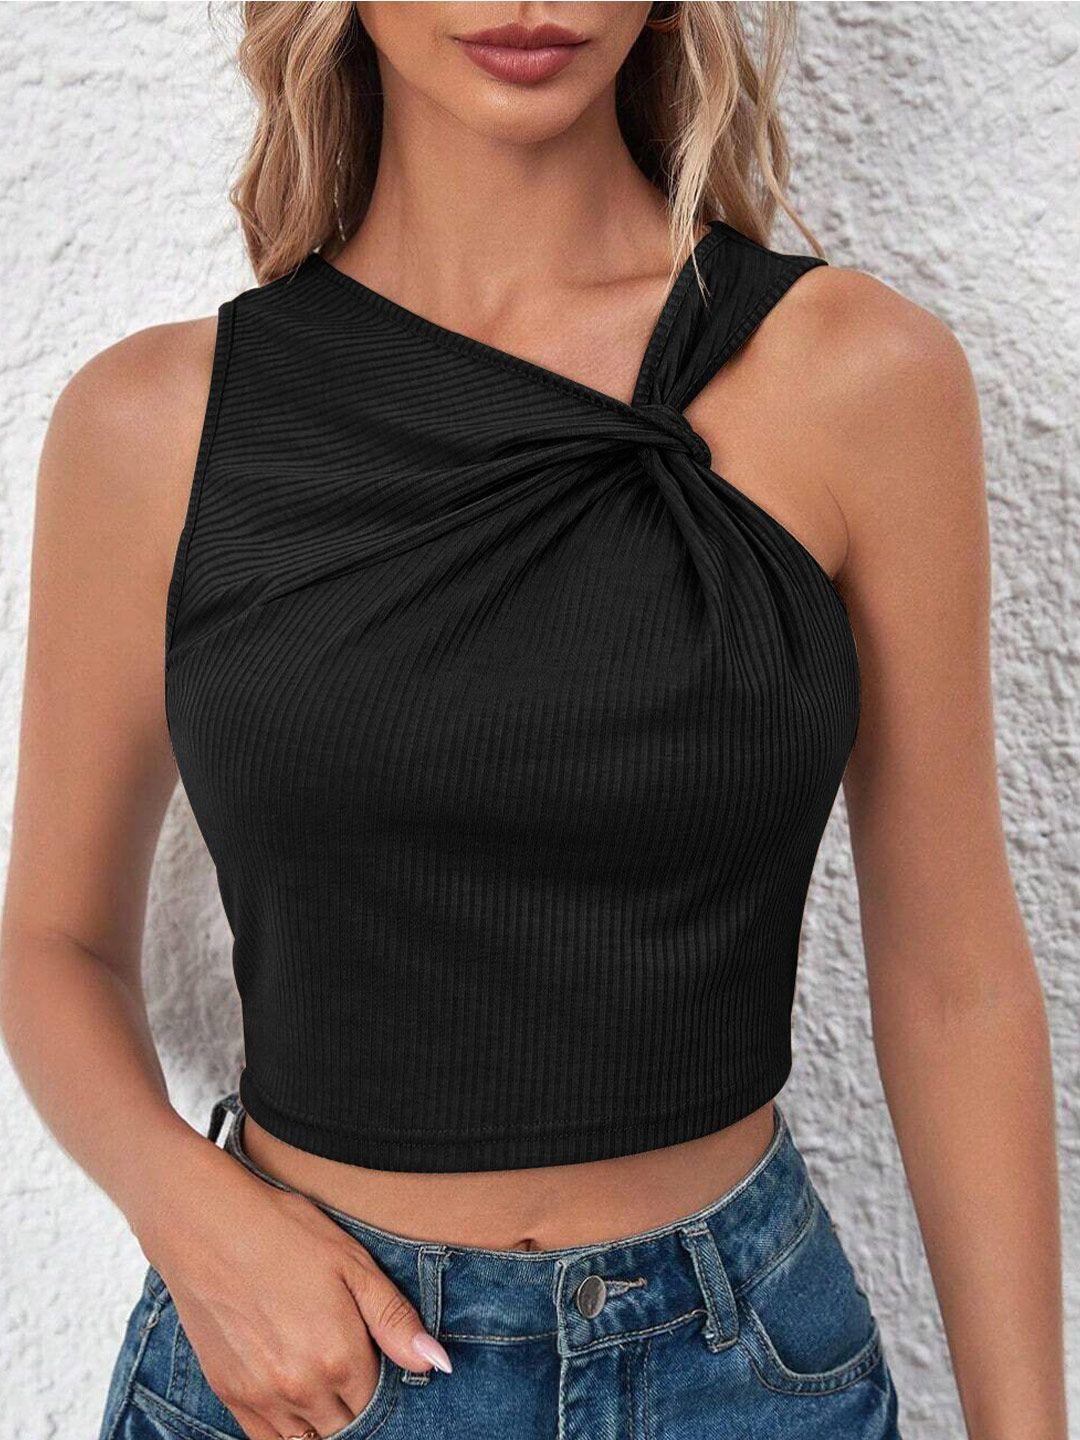 stylecast black asymmetric neck fitted crop top